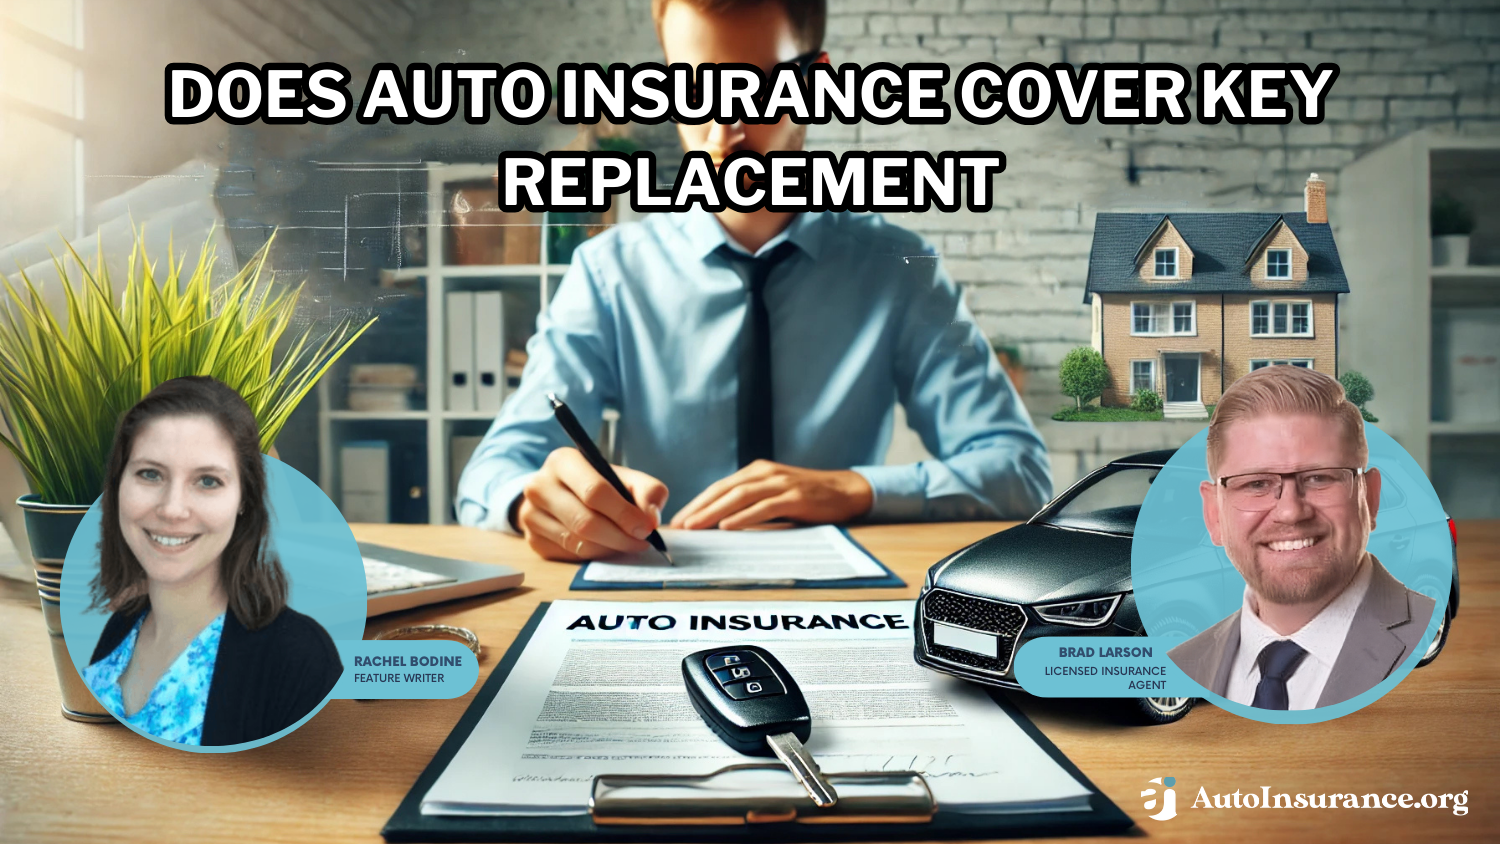 Does auto insurance cover key replacement?